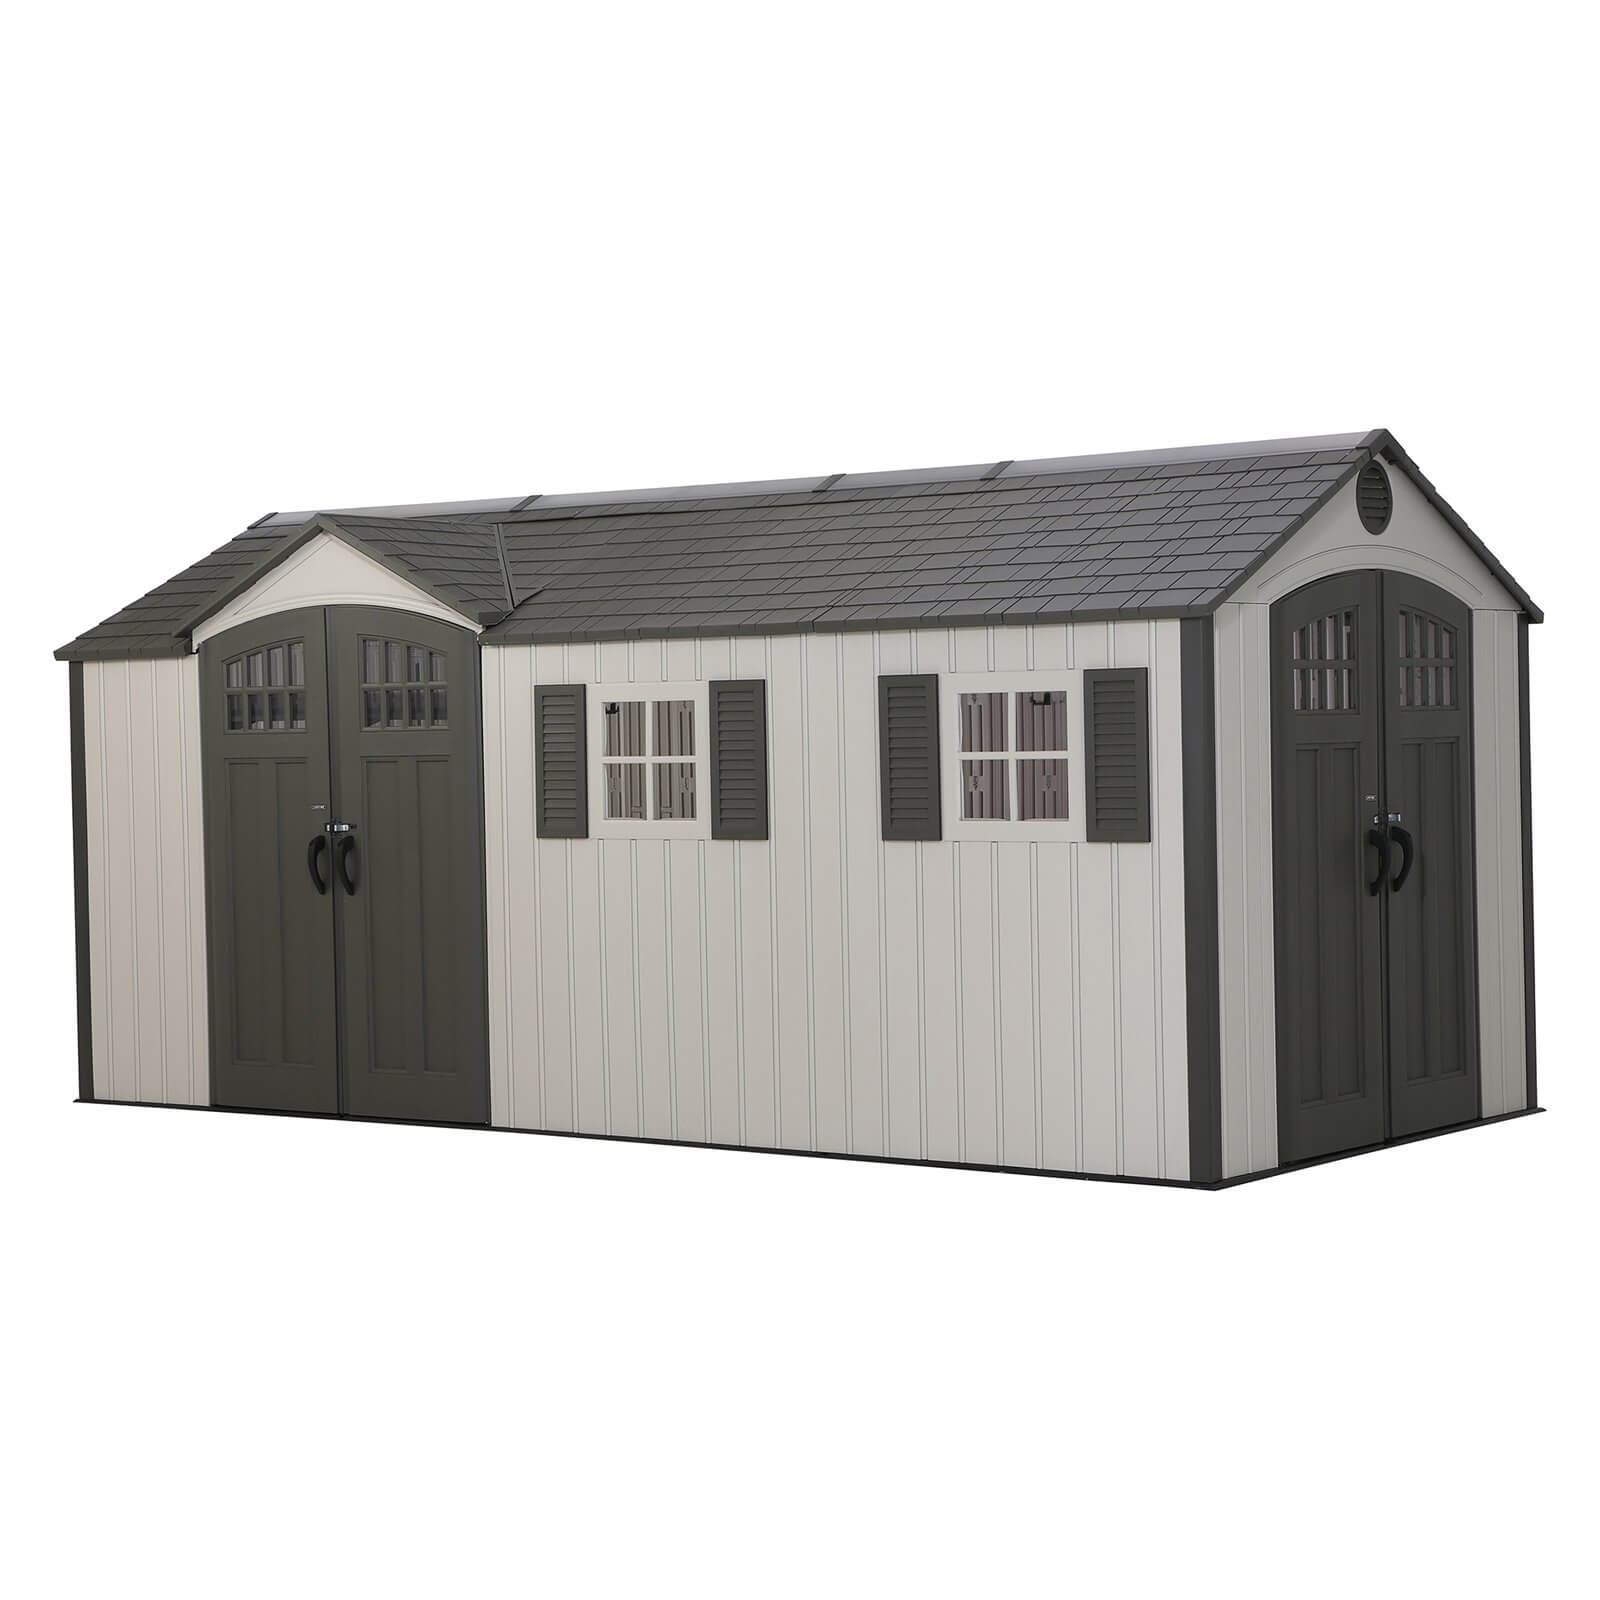 Lifetime 17.5x8 ft Dual Entry Outdoor Storage Shed